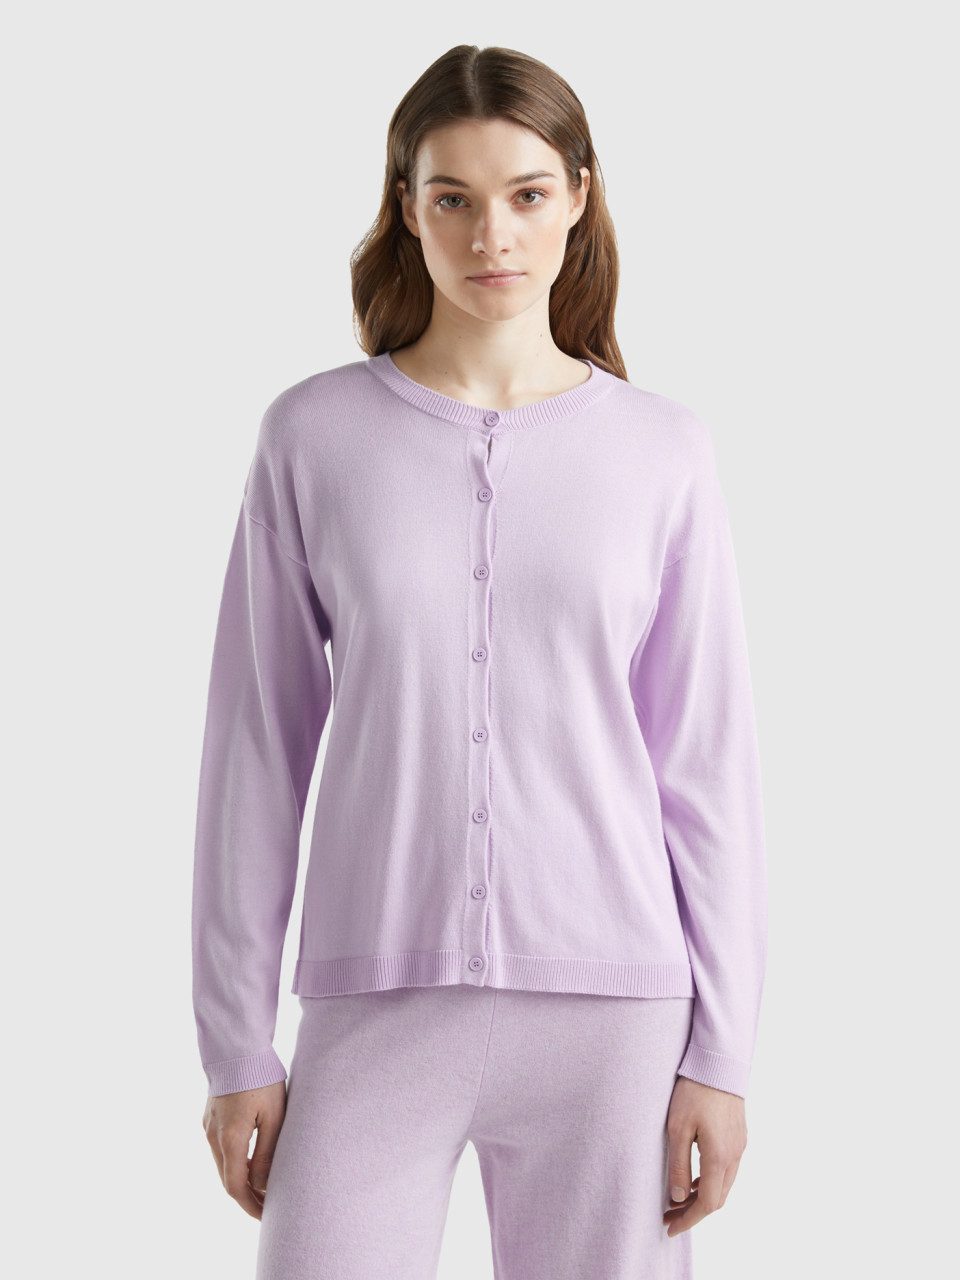 Benetton, Crew Neck Cardigan With Buttons, Lilac, Women